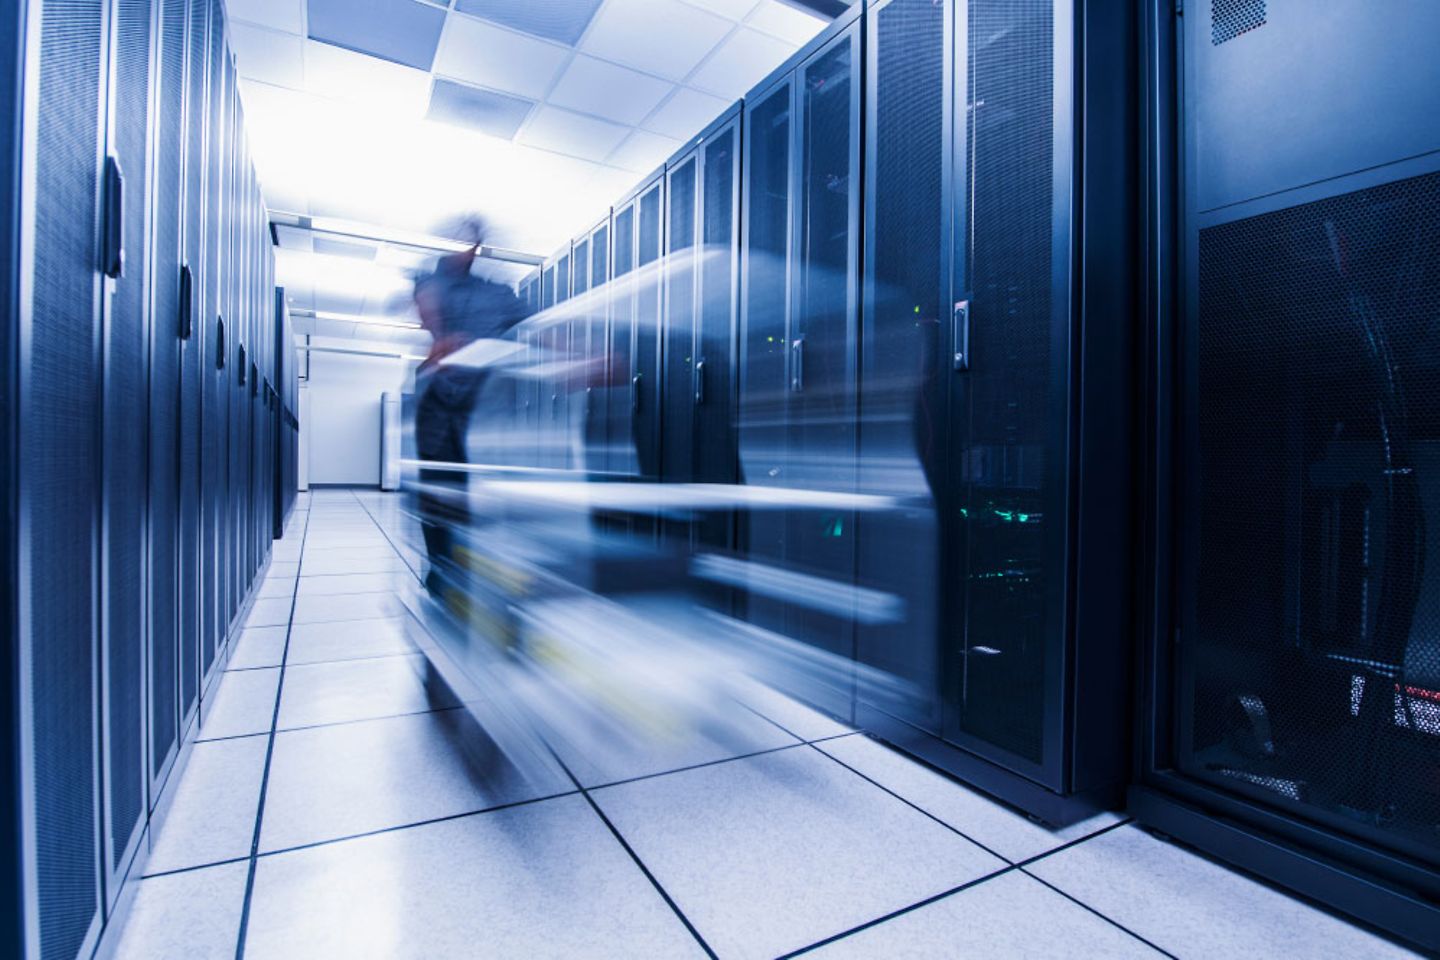 Server room with a blurry figure in it